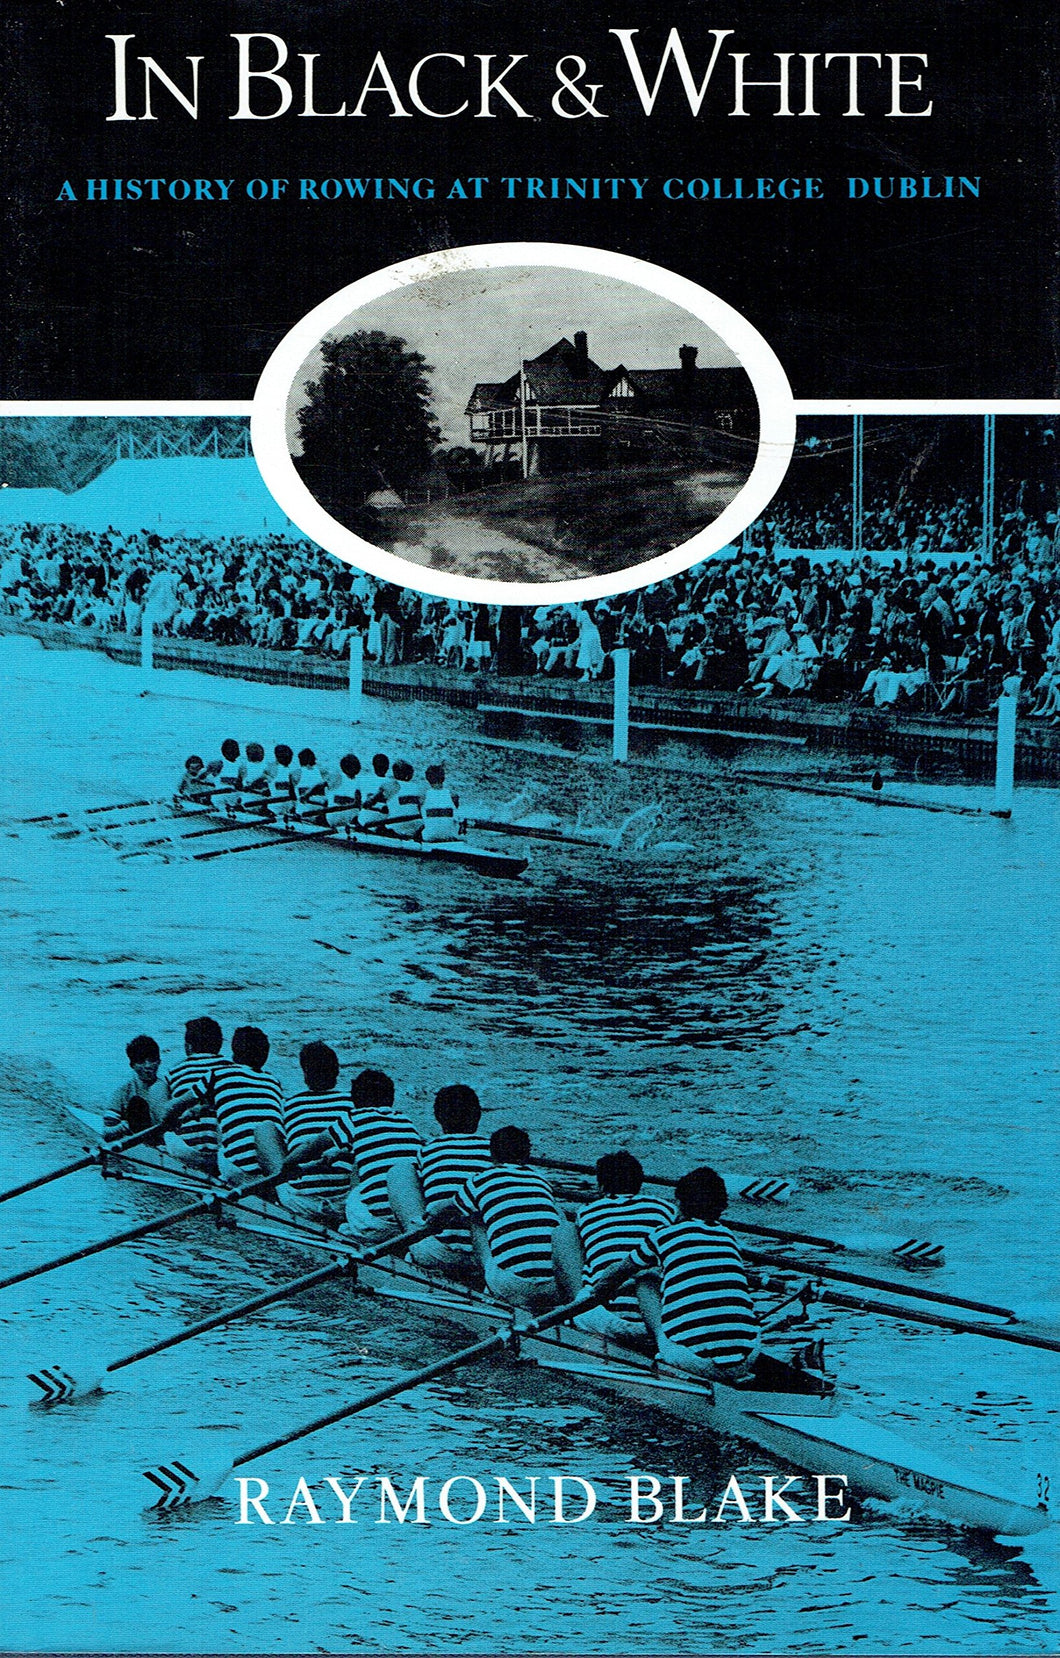 In black and white: A history of rowing at Trinity College, Dublin